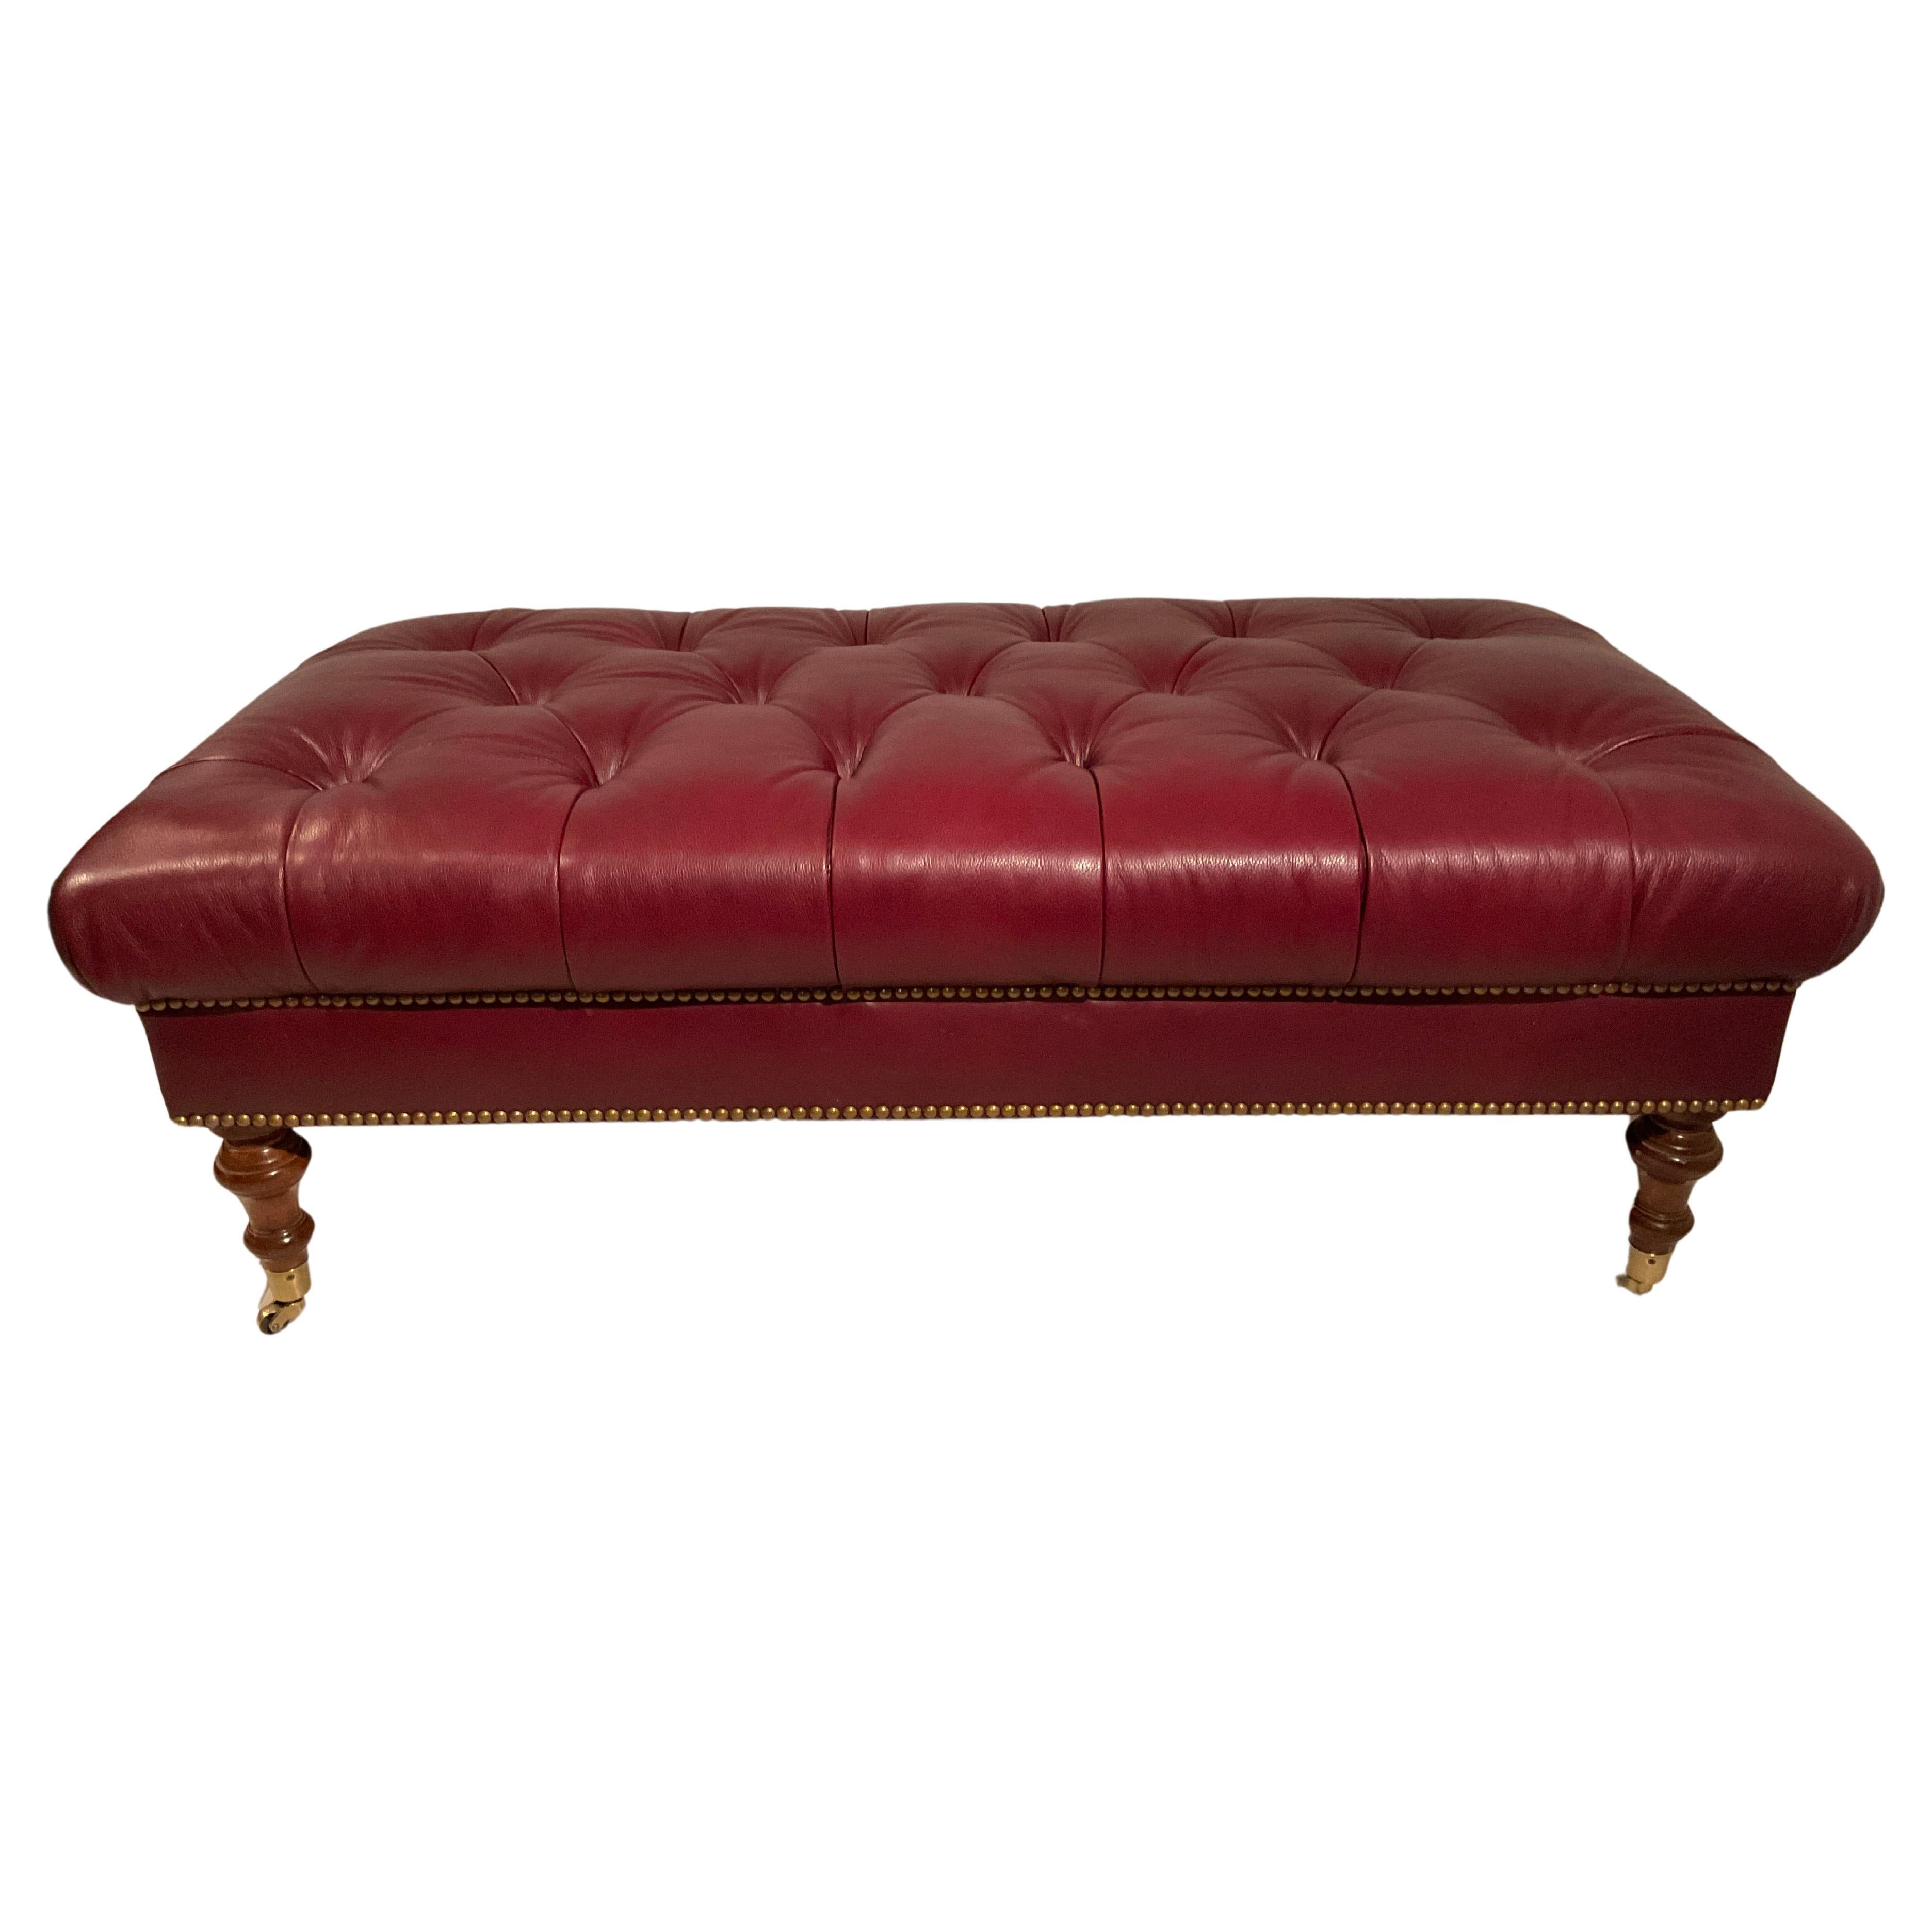 Edward Ferrell Tufted Red Leather Ottoman On Brass Casters For Sale